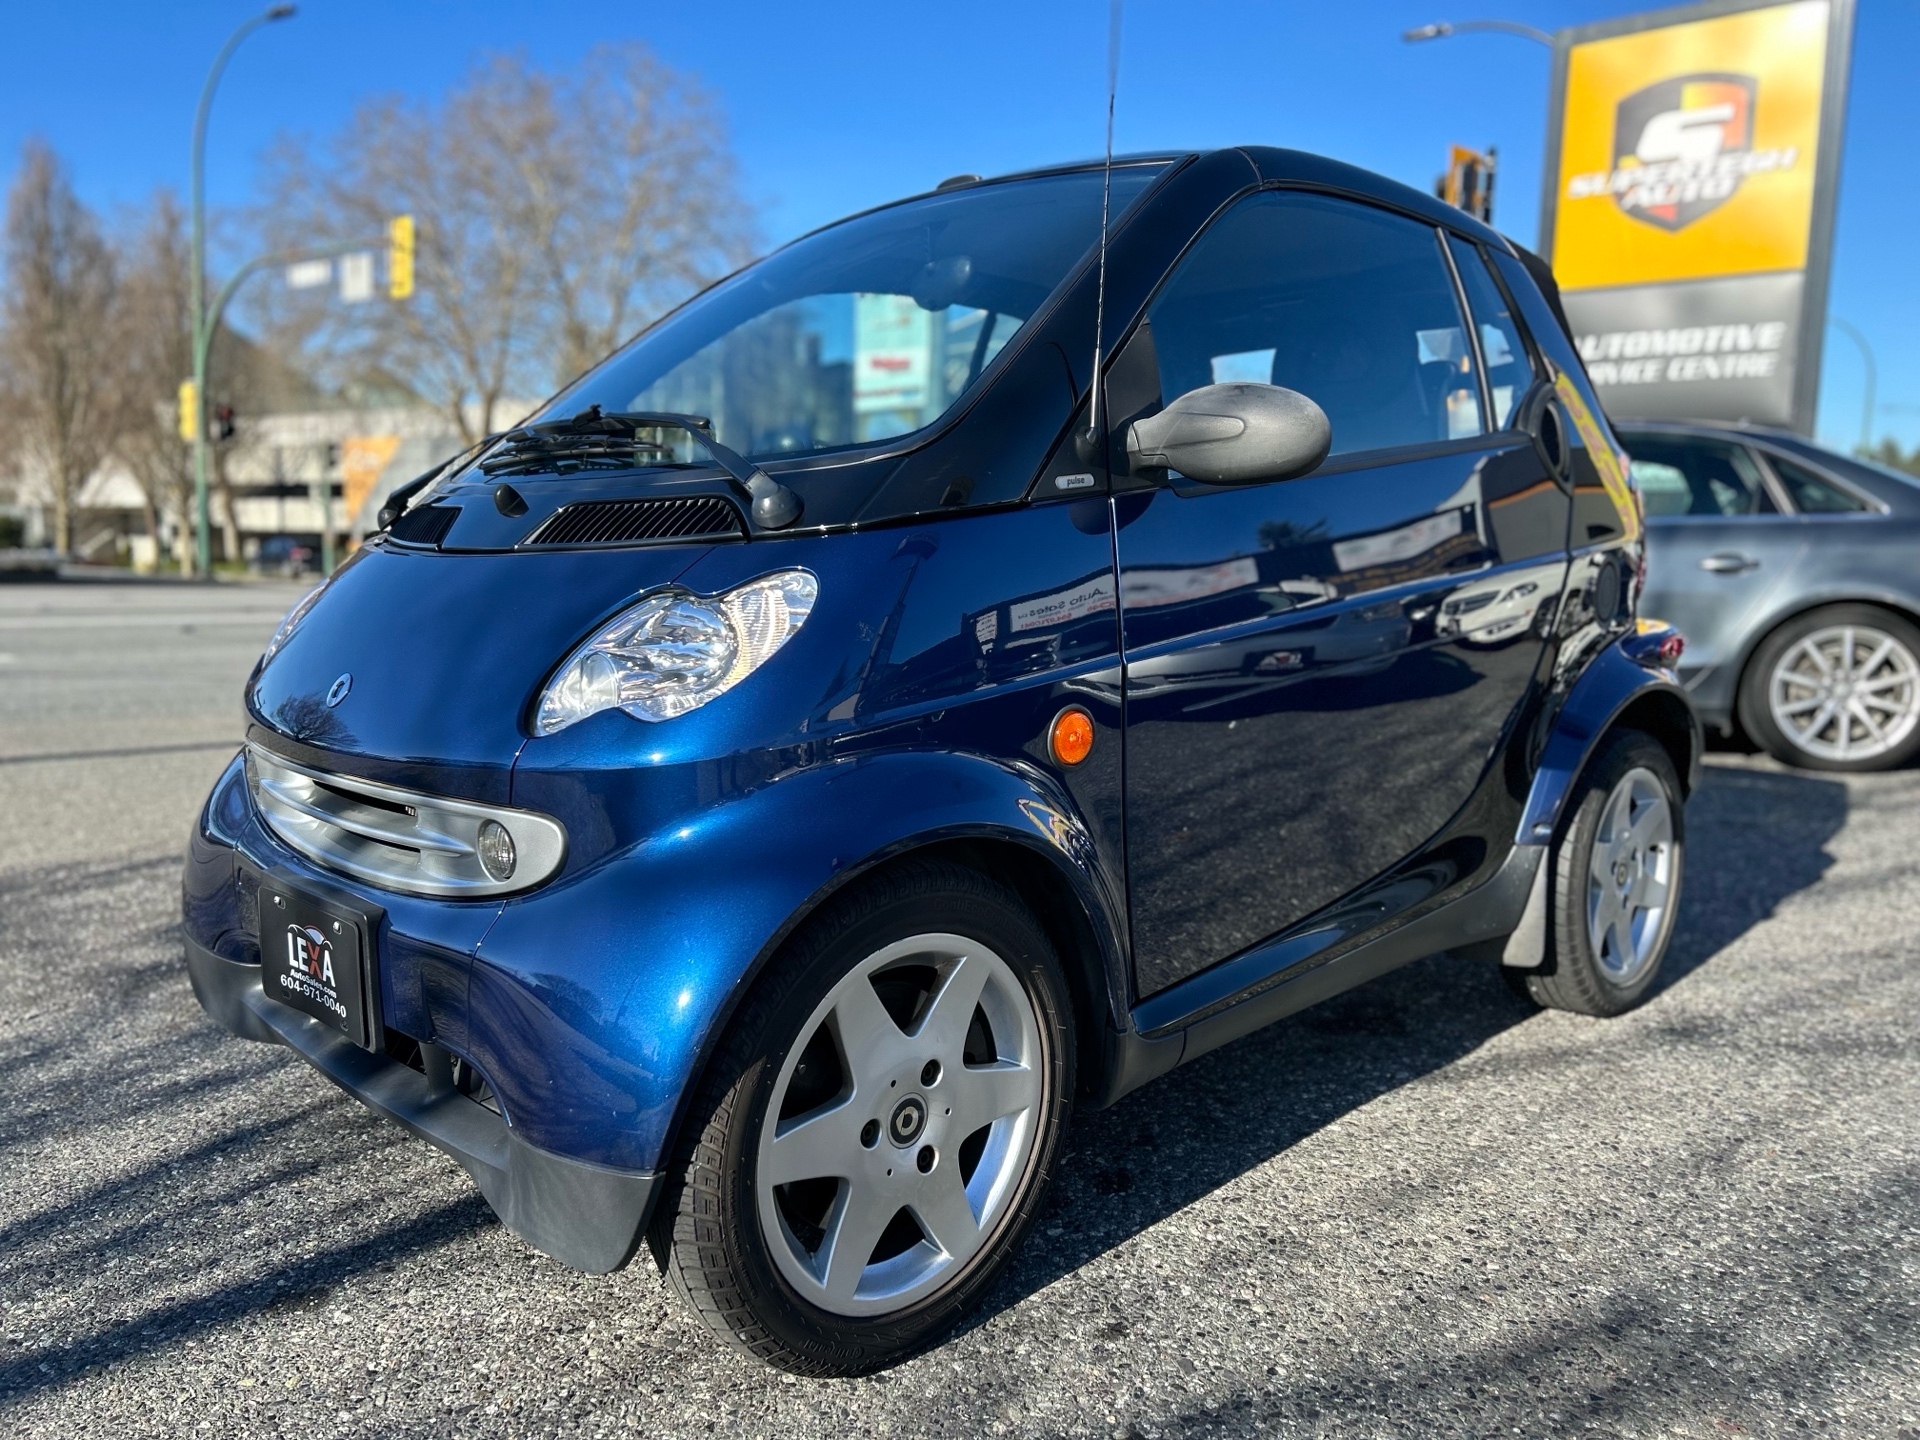 2006 smart fortwo 2dr Cabriolet Pure